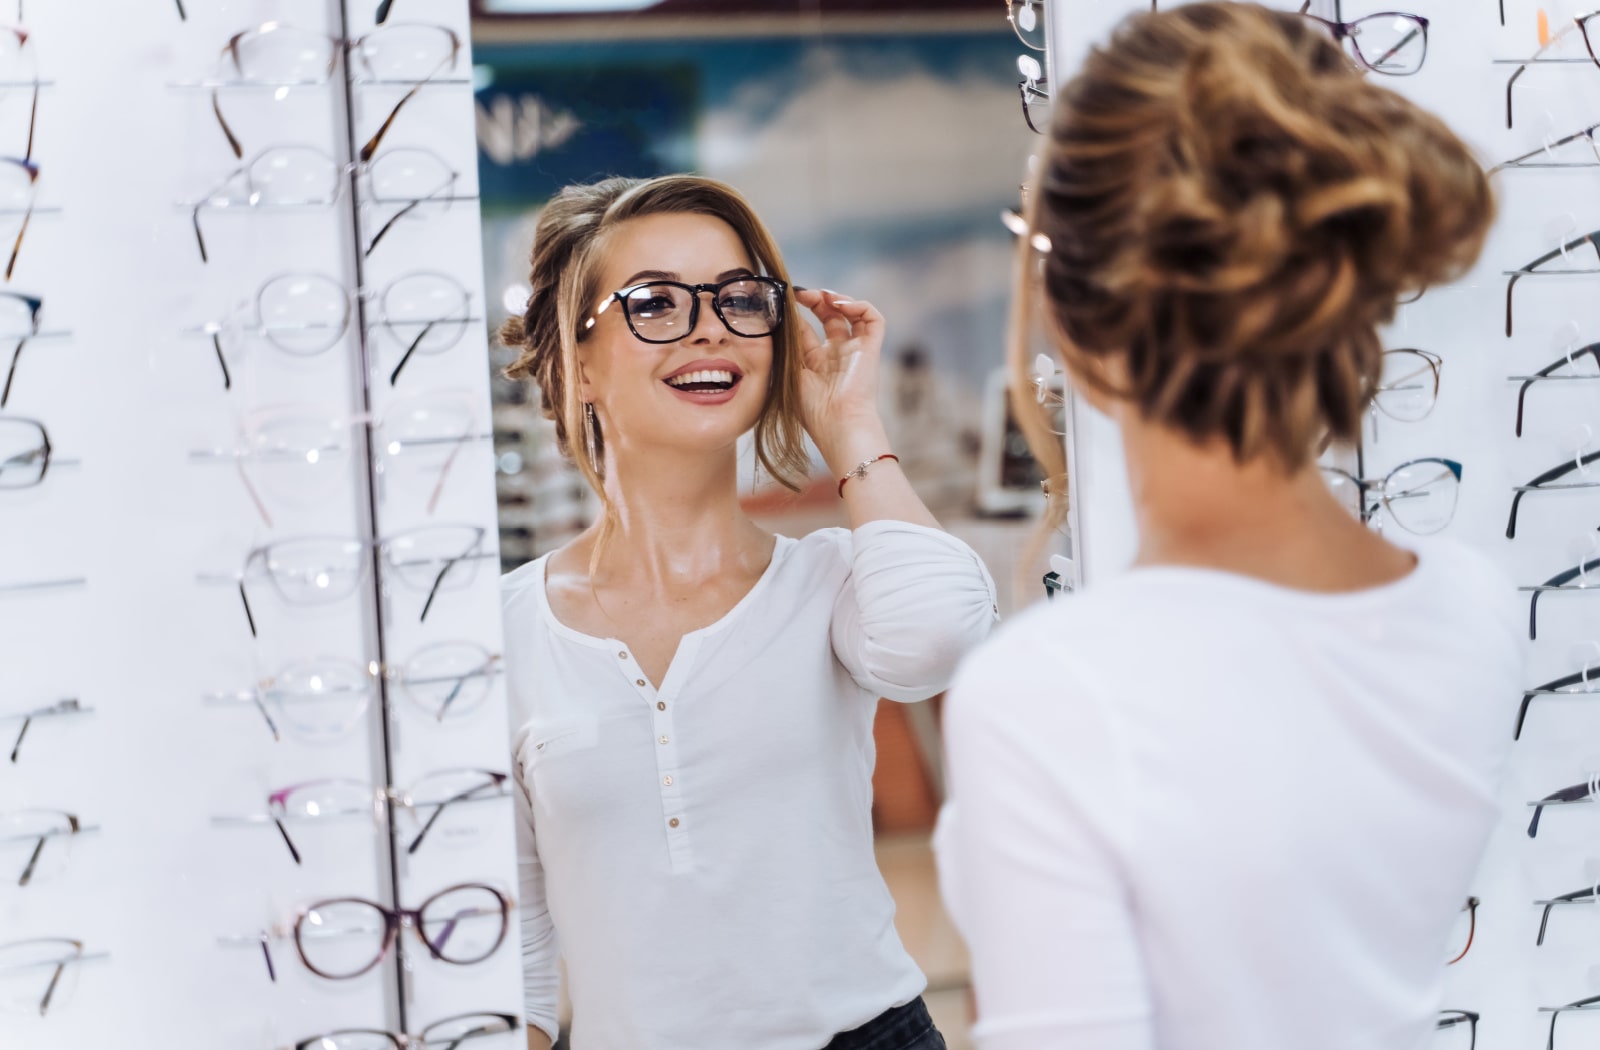 A woman trying on a pair of glasses at the optometrist's office